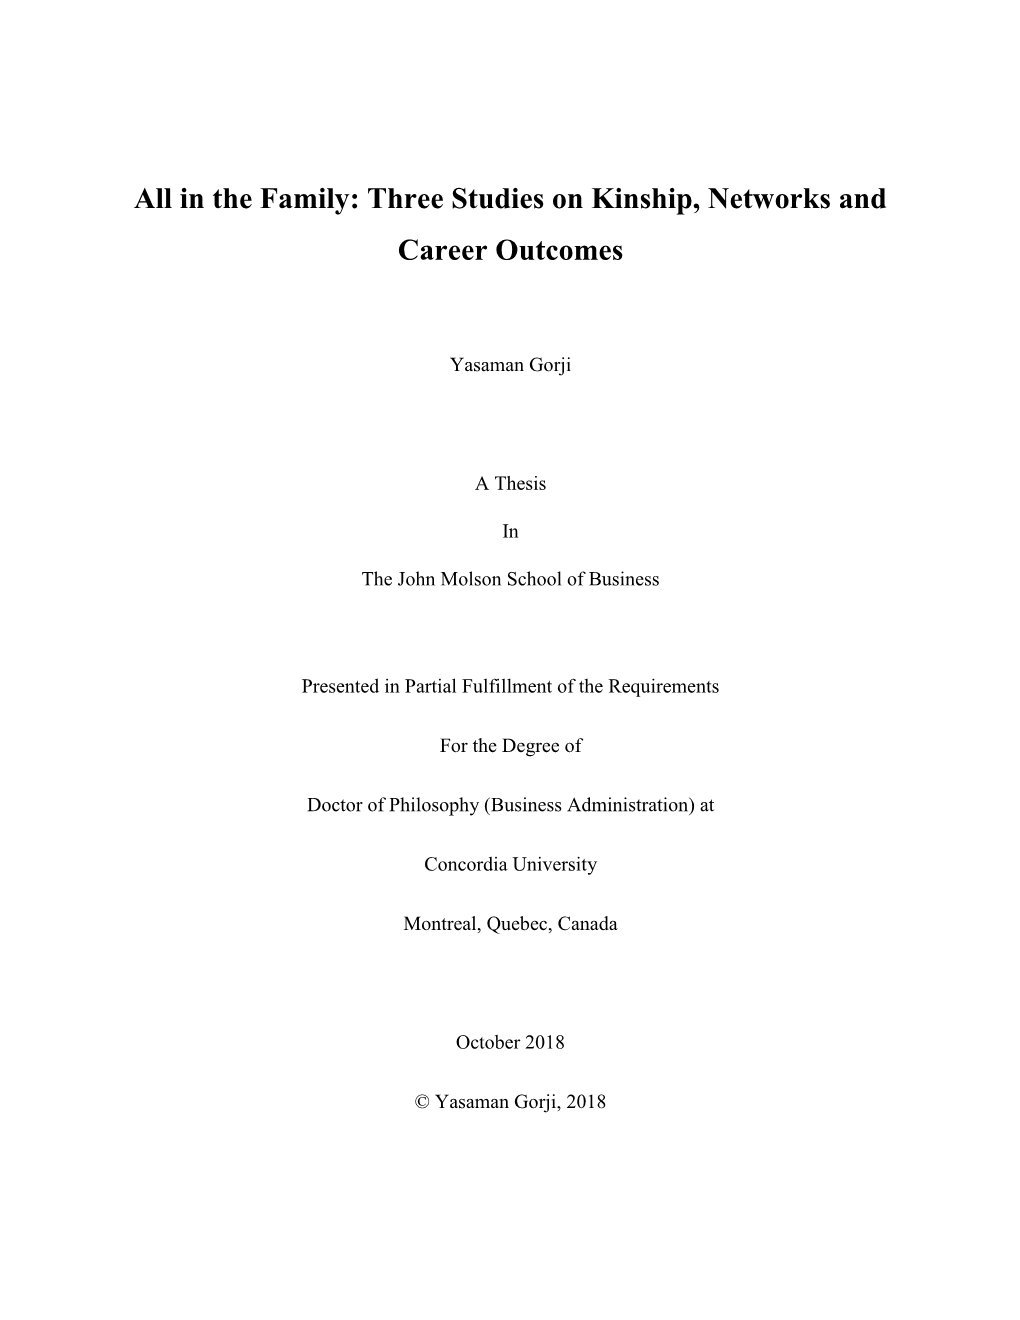 All in the Family: Three Studies on Kinship, Networks and Career Outcomes